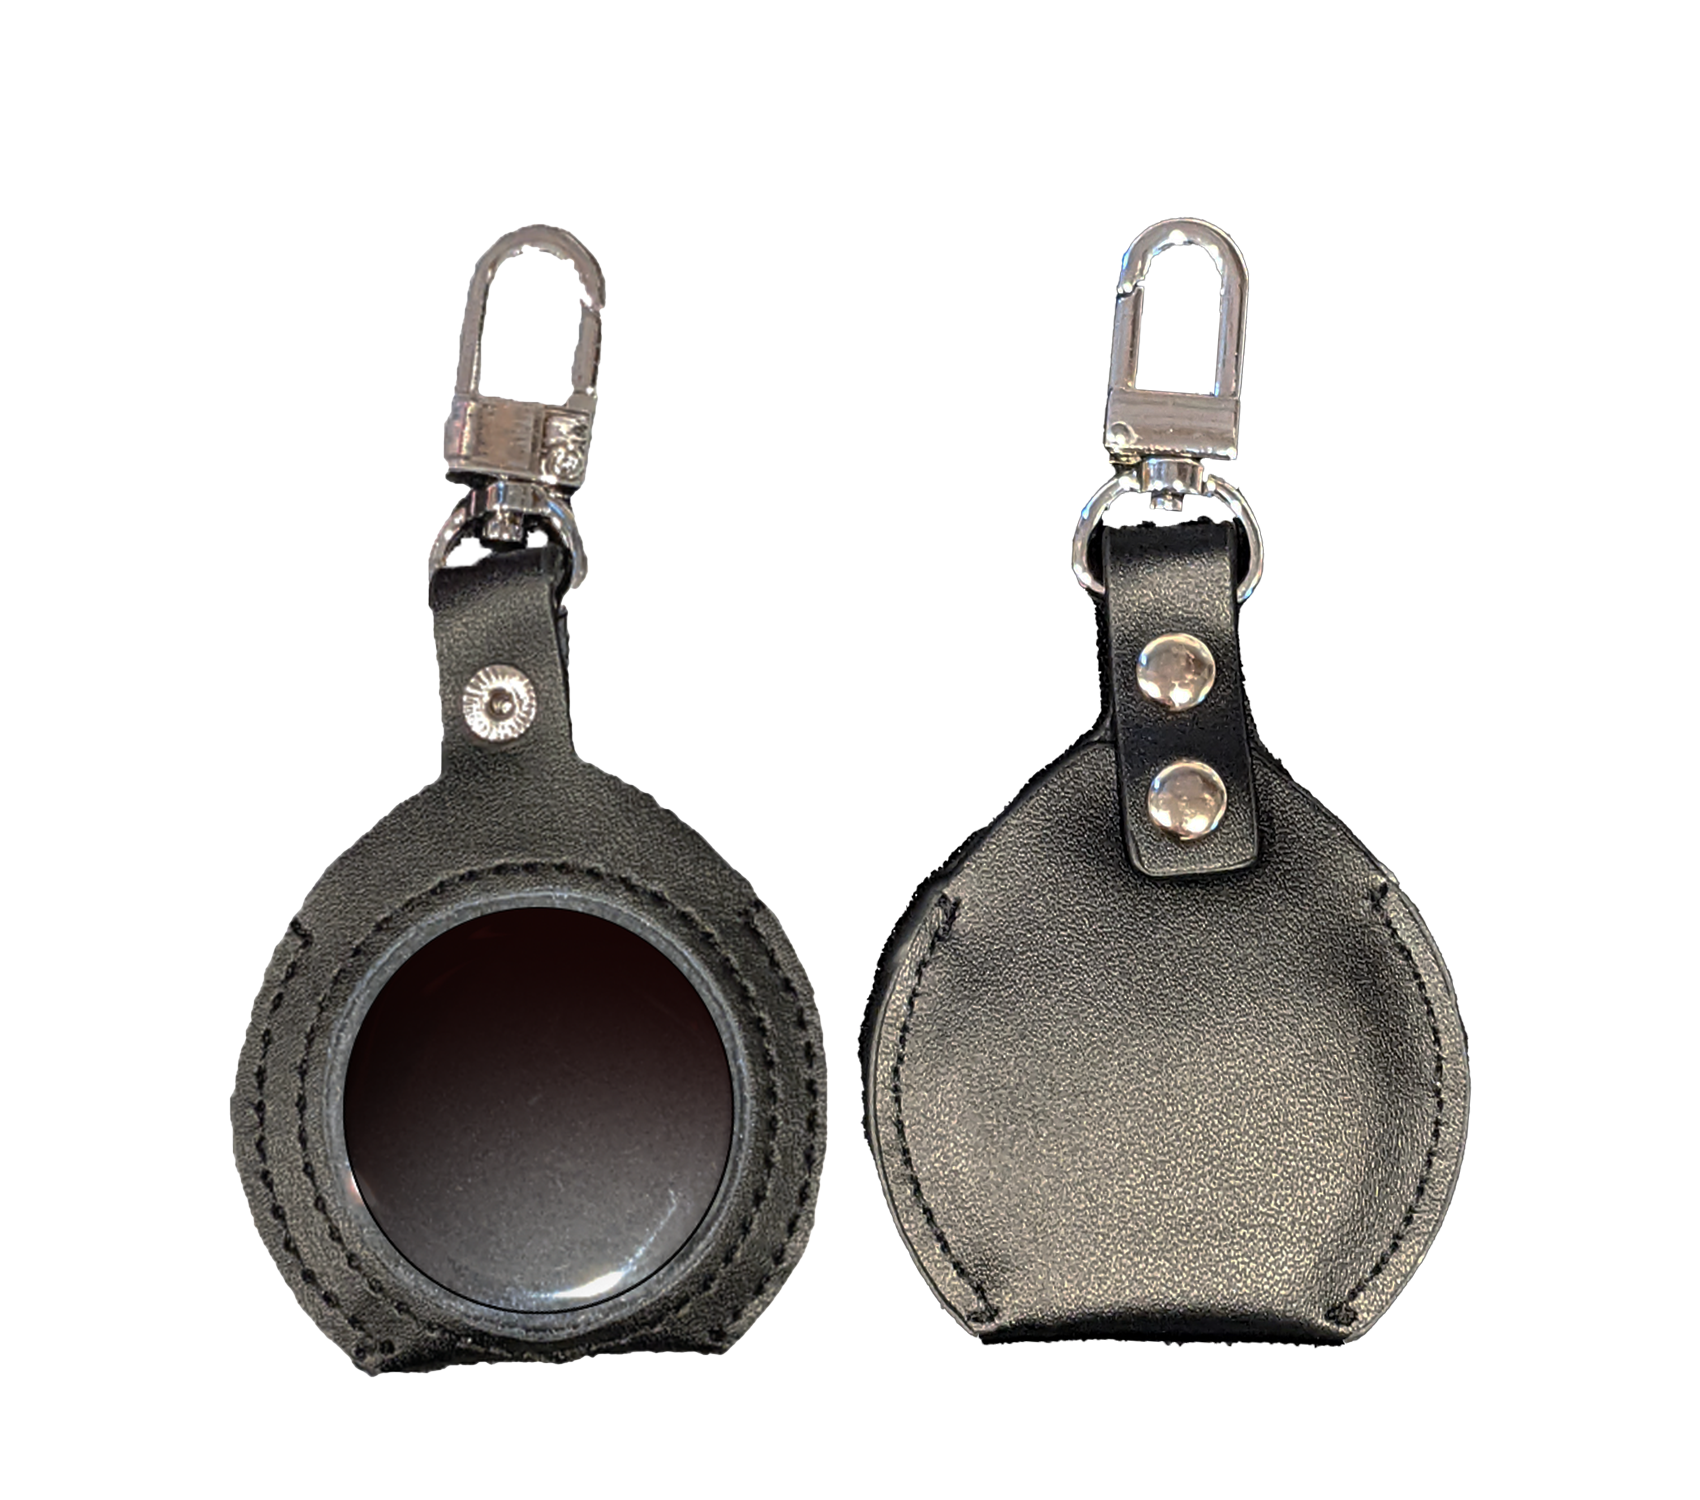 Leather Keychain Holder for any My Recovery Store 40mm medallions.  Available in Black and Brown